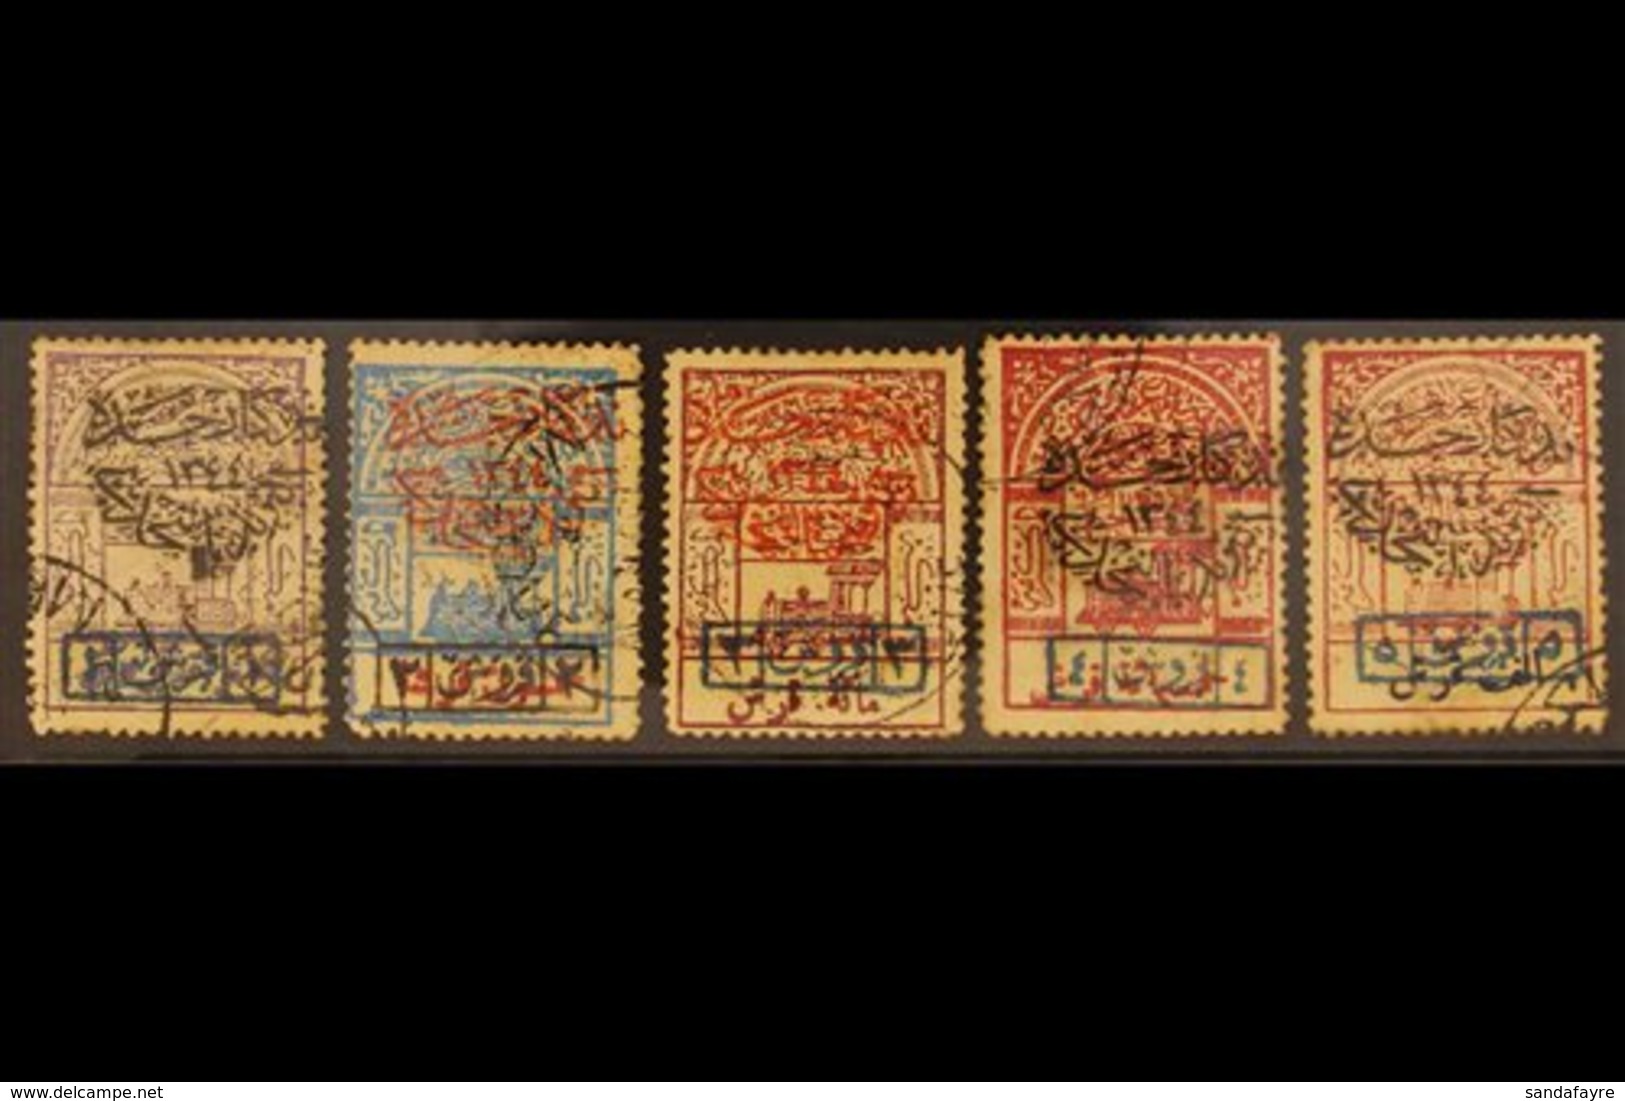 1925 (23 DEC) Capture Of Jeddah Complete Handstamped Set On Railway Tax Stamps, SG 249/253, Cto Used With Gum Toning, 2p - Arabia Saudita